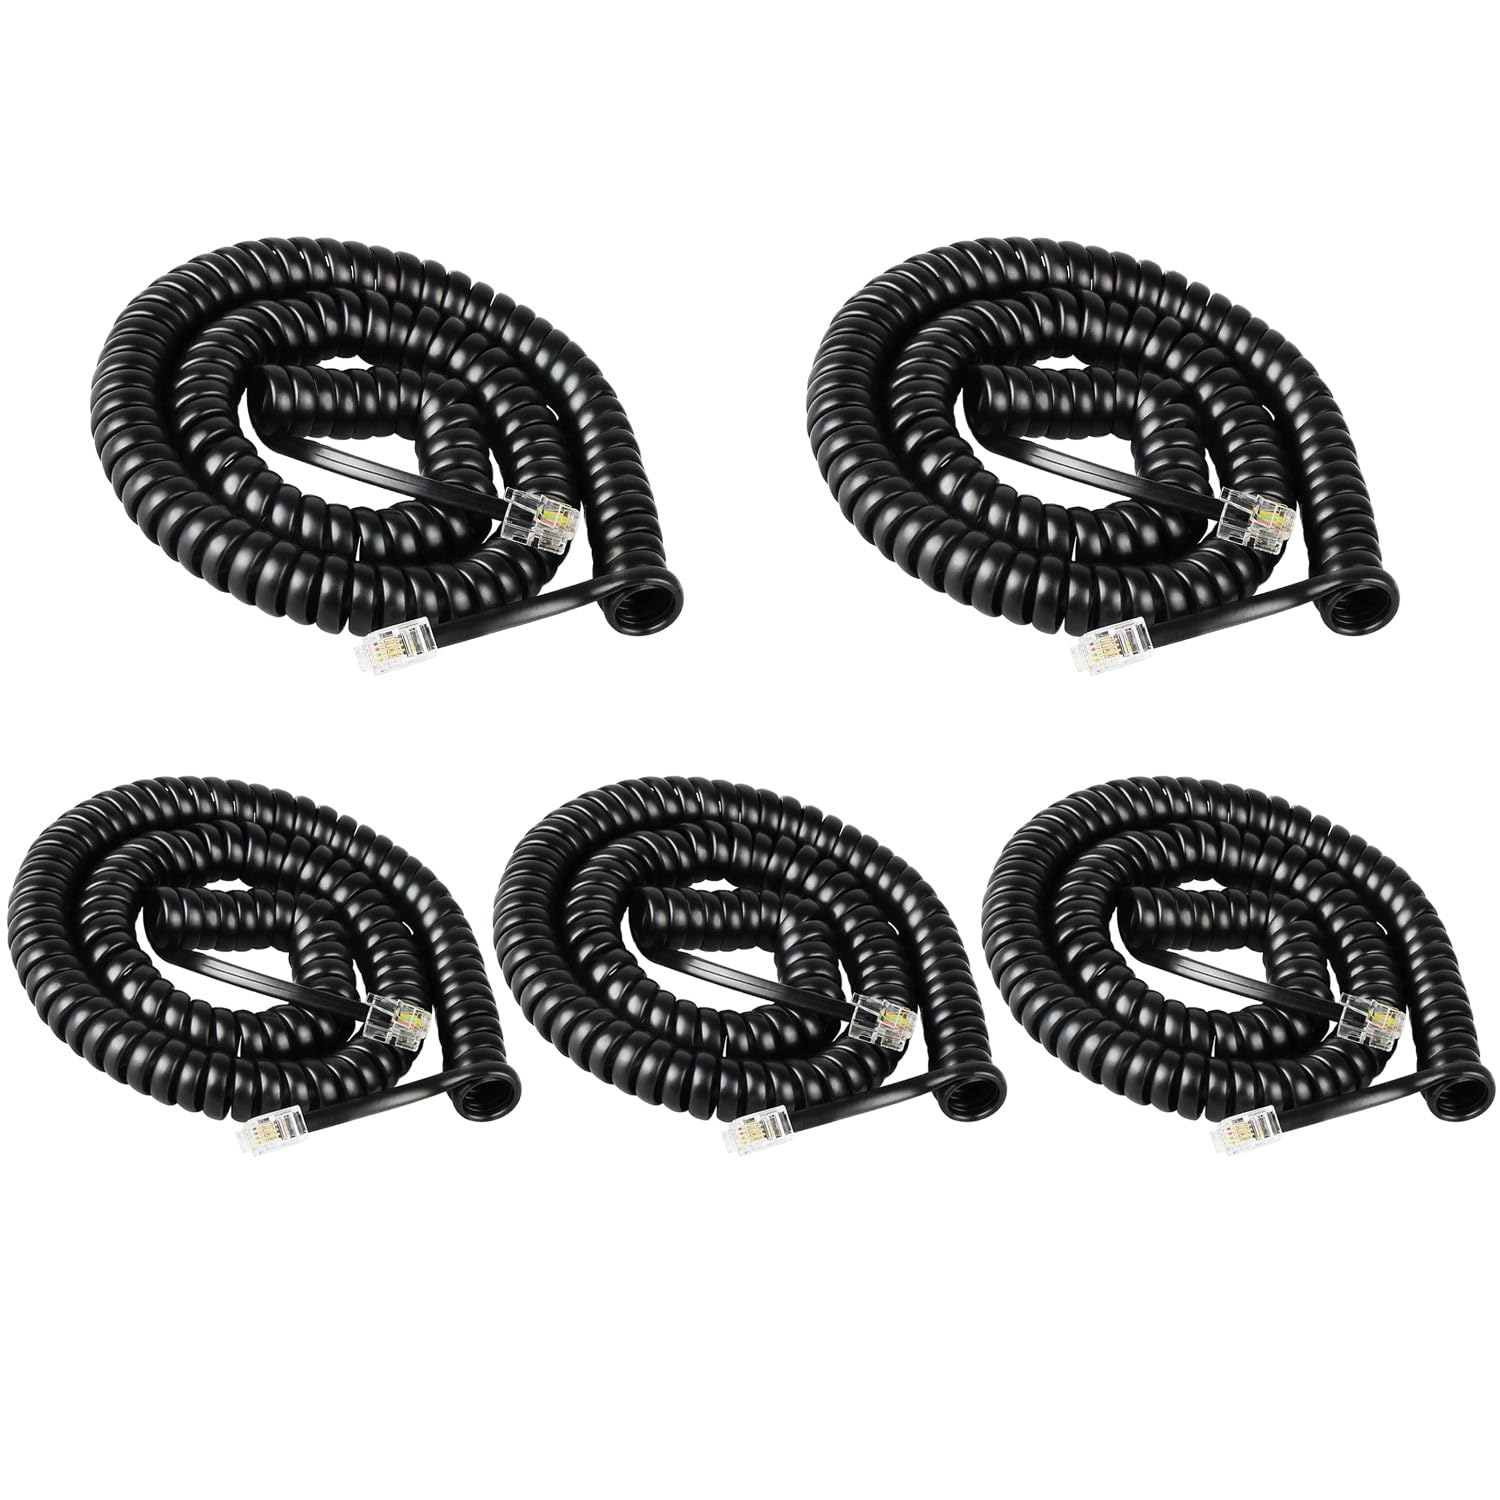 Black Coiled Telephone Cord Home Landline Phone Spiral Cable Connector